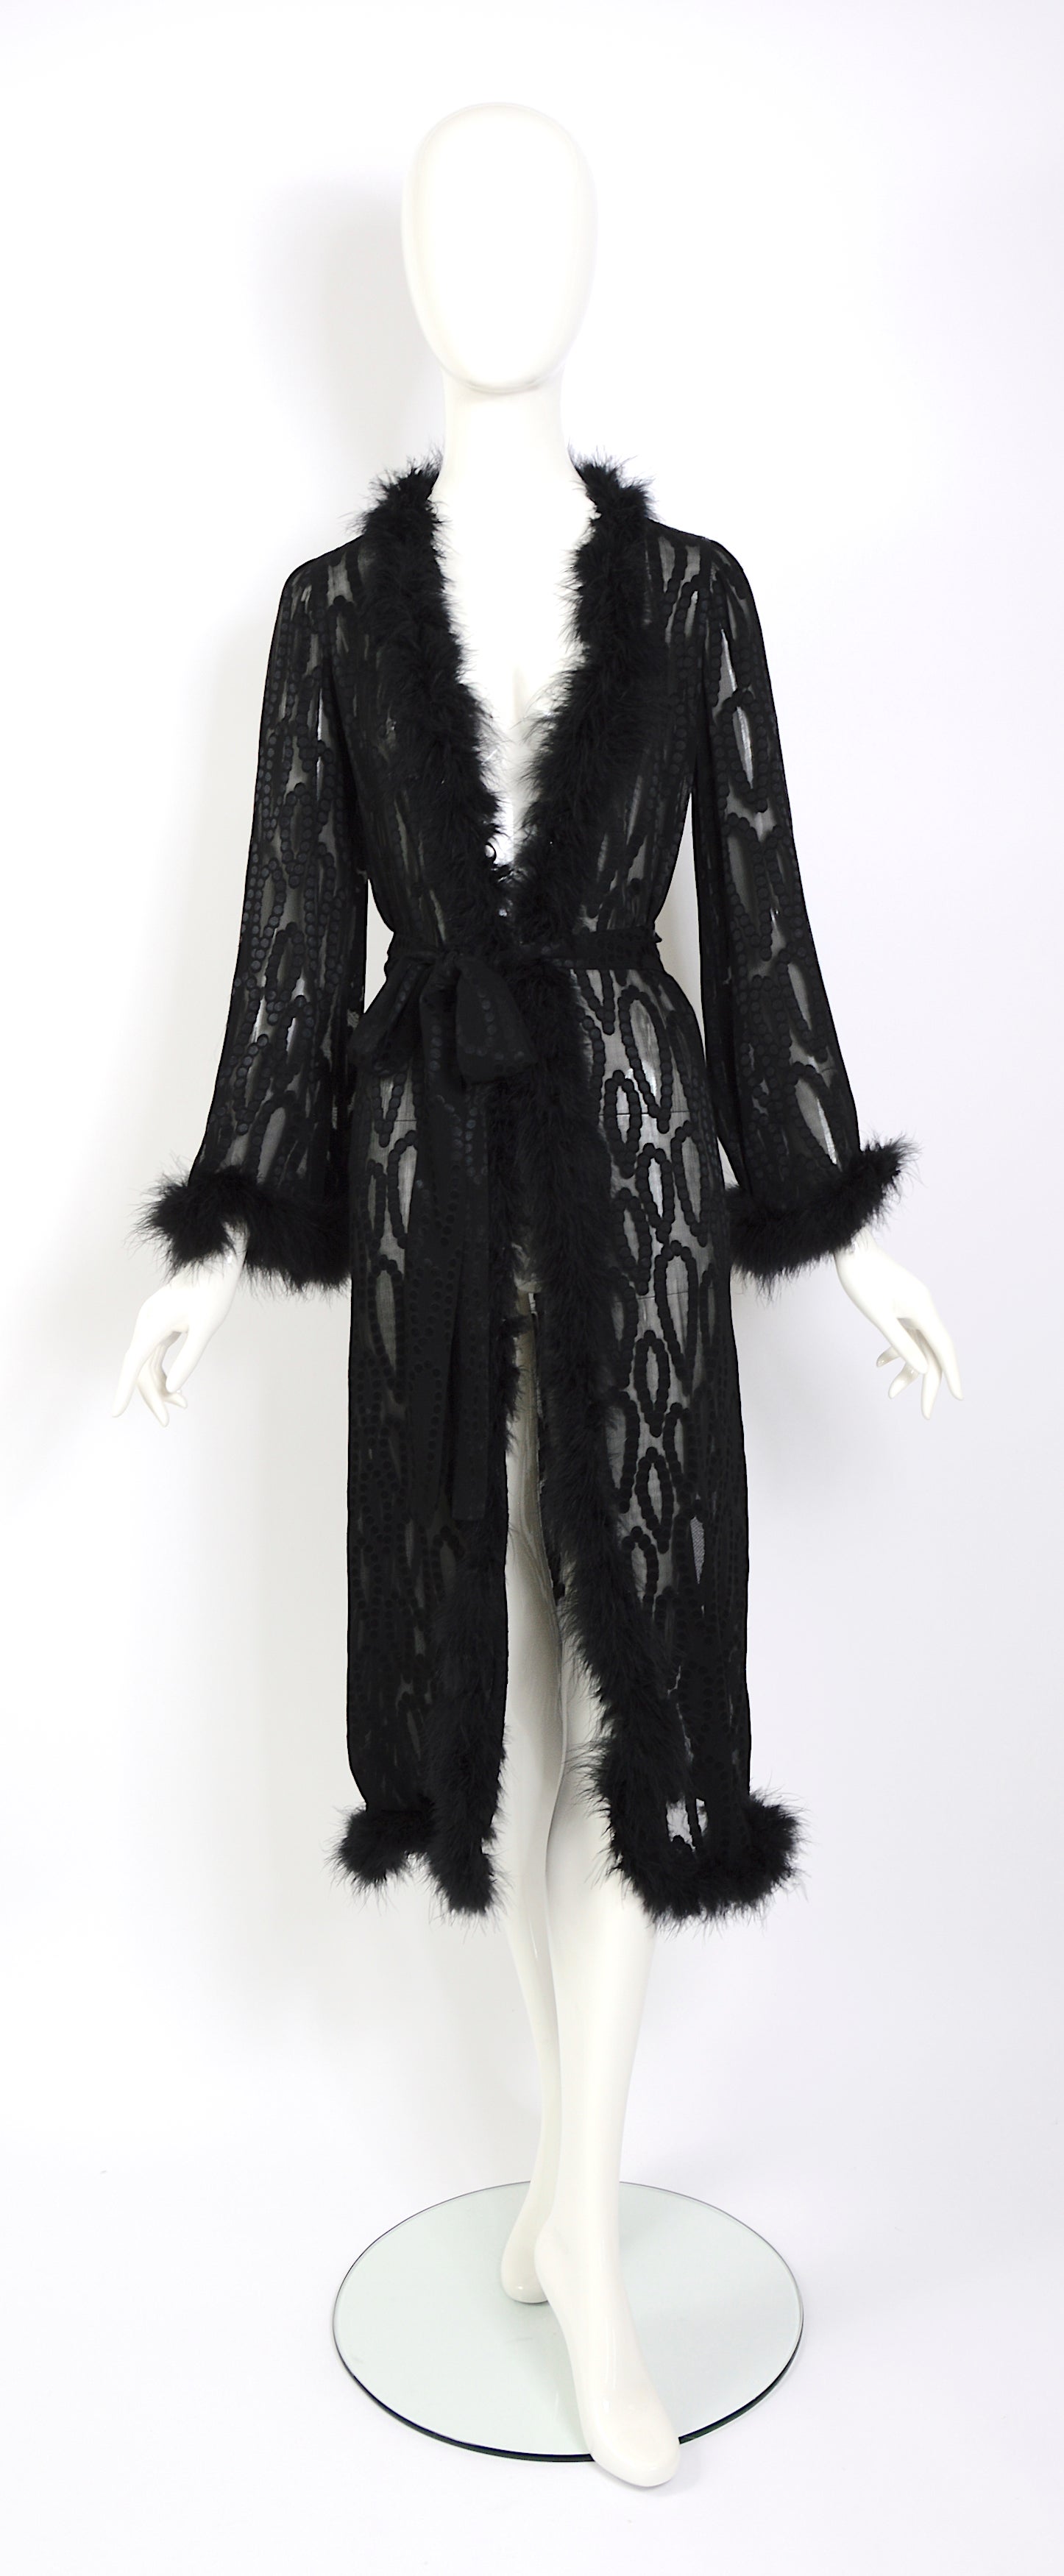 Vintage rare one-of-a-kind 1970s Yves Saint Laurent “rive gauche” black dotted silk trimmed with marabou feather-light evening robe or coat.
This YSL robe or coat is certainly a statement piece that would have been very fashionable in the 1970s and